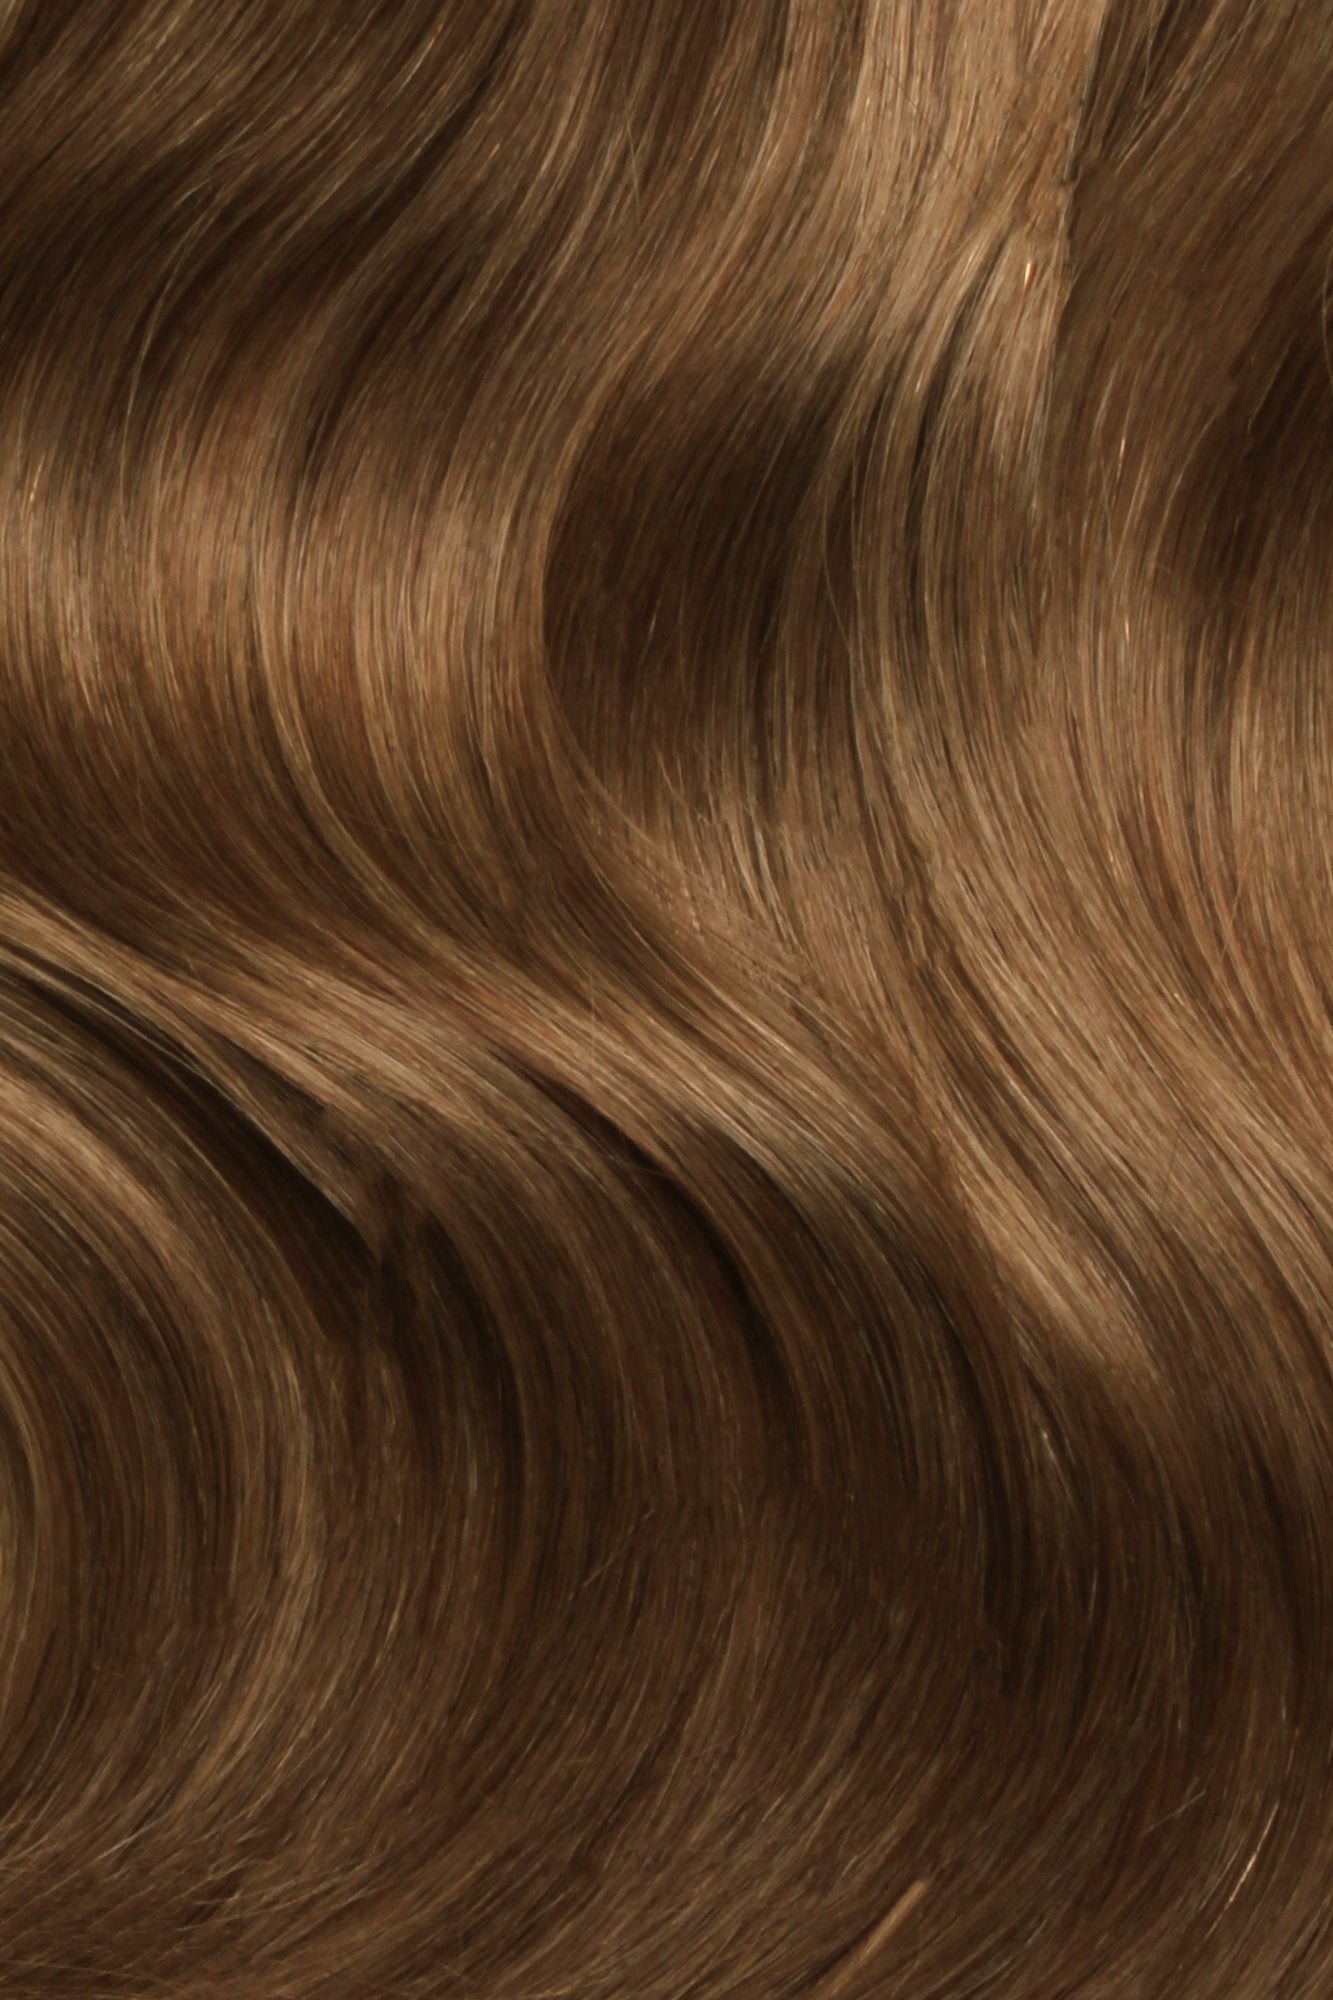 Nano Bonds 24 Inches - SWAY Hair Extensions Chestnut-Brown-Mix-4-6 Ultra-fine, invisible bonds for a flawless, natural look. 100% Remy Human hair, lightweight and versatile. Reusable and perfect for individual or salon use.